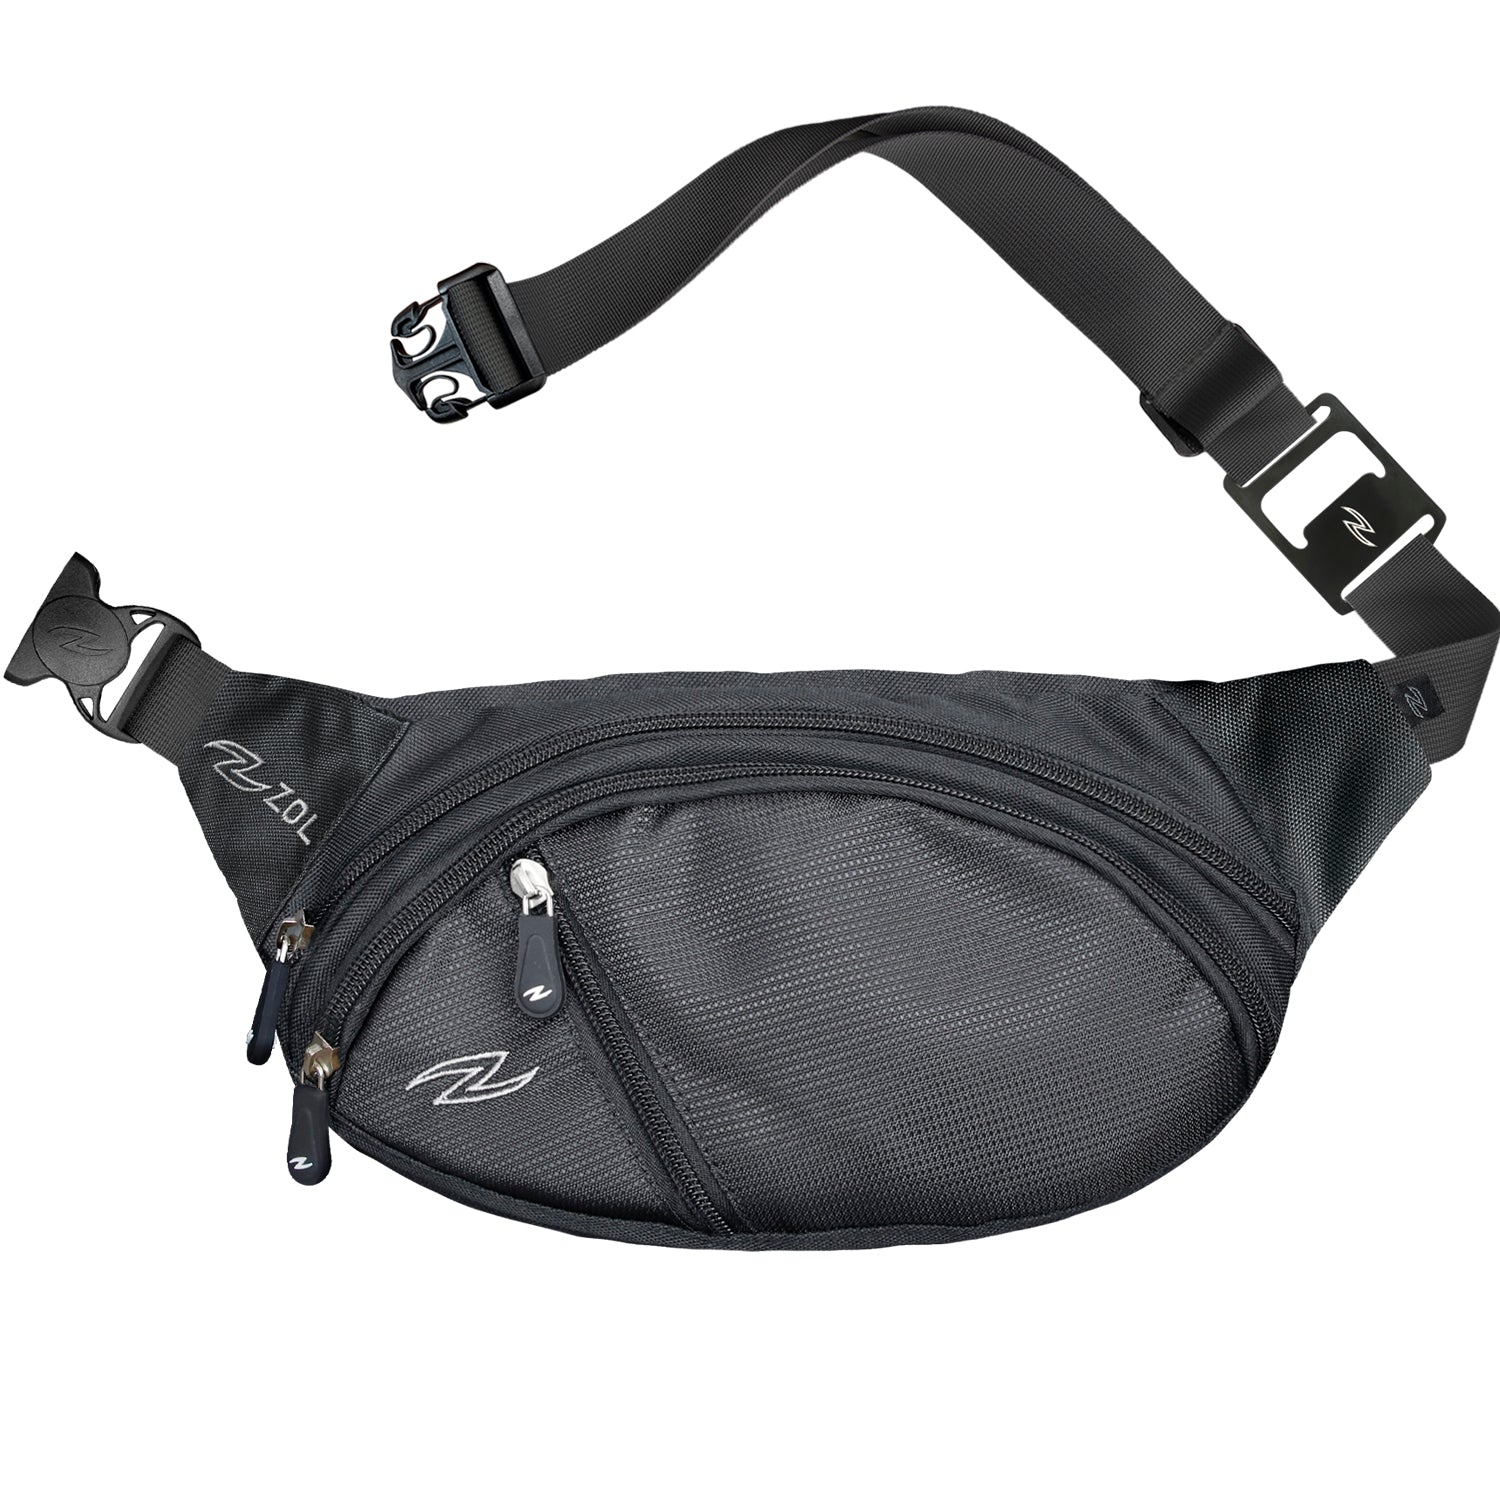 Zol Xsmall Fanny Pack With Bottle Opener - Zol Cycling